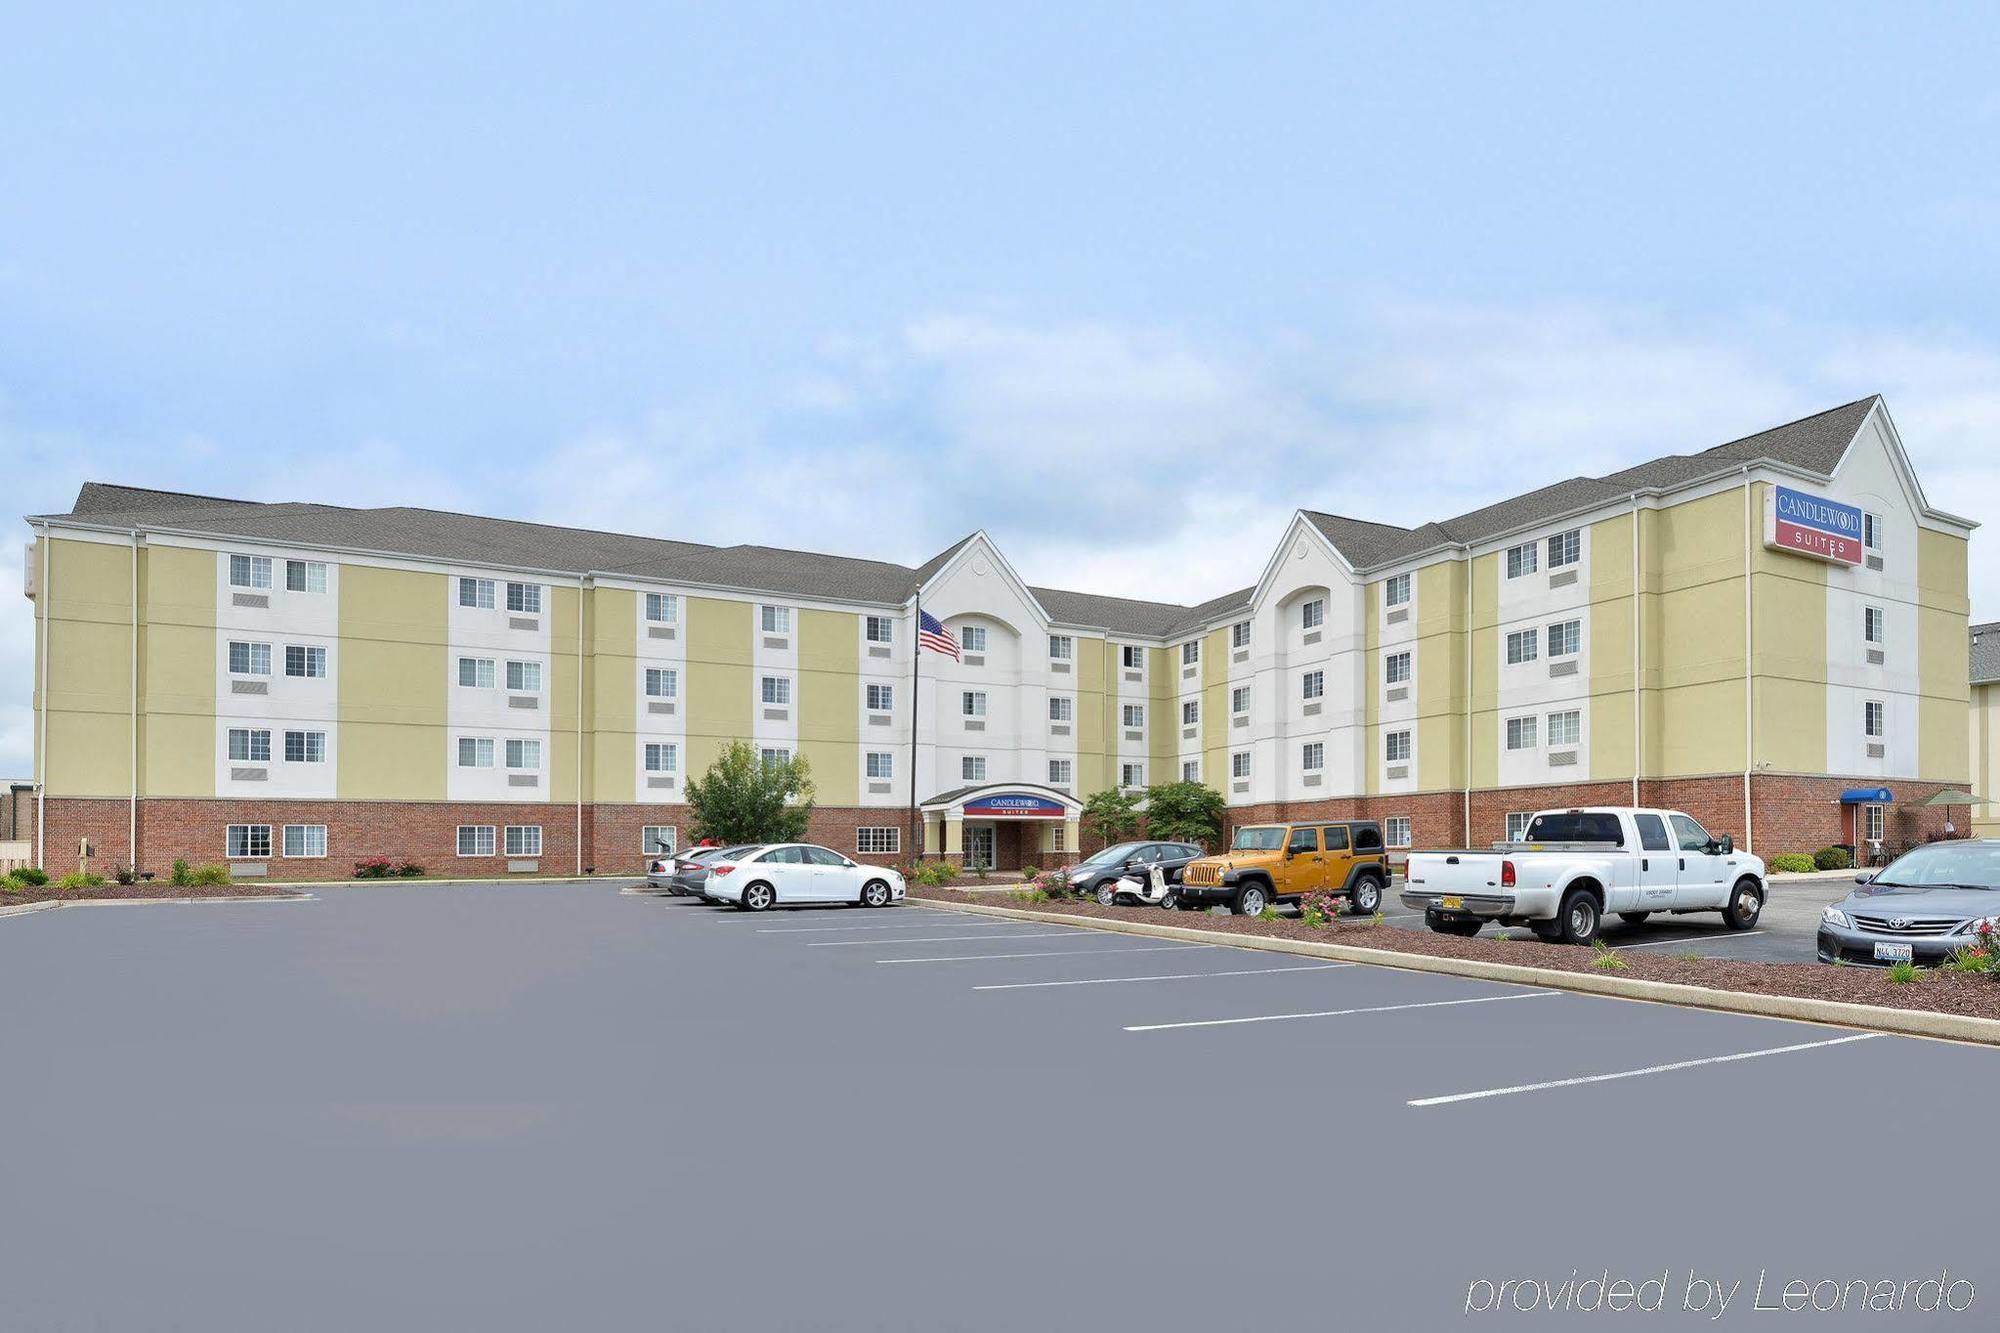 Candlewood Suites Bloomington-Normal Exterior photo